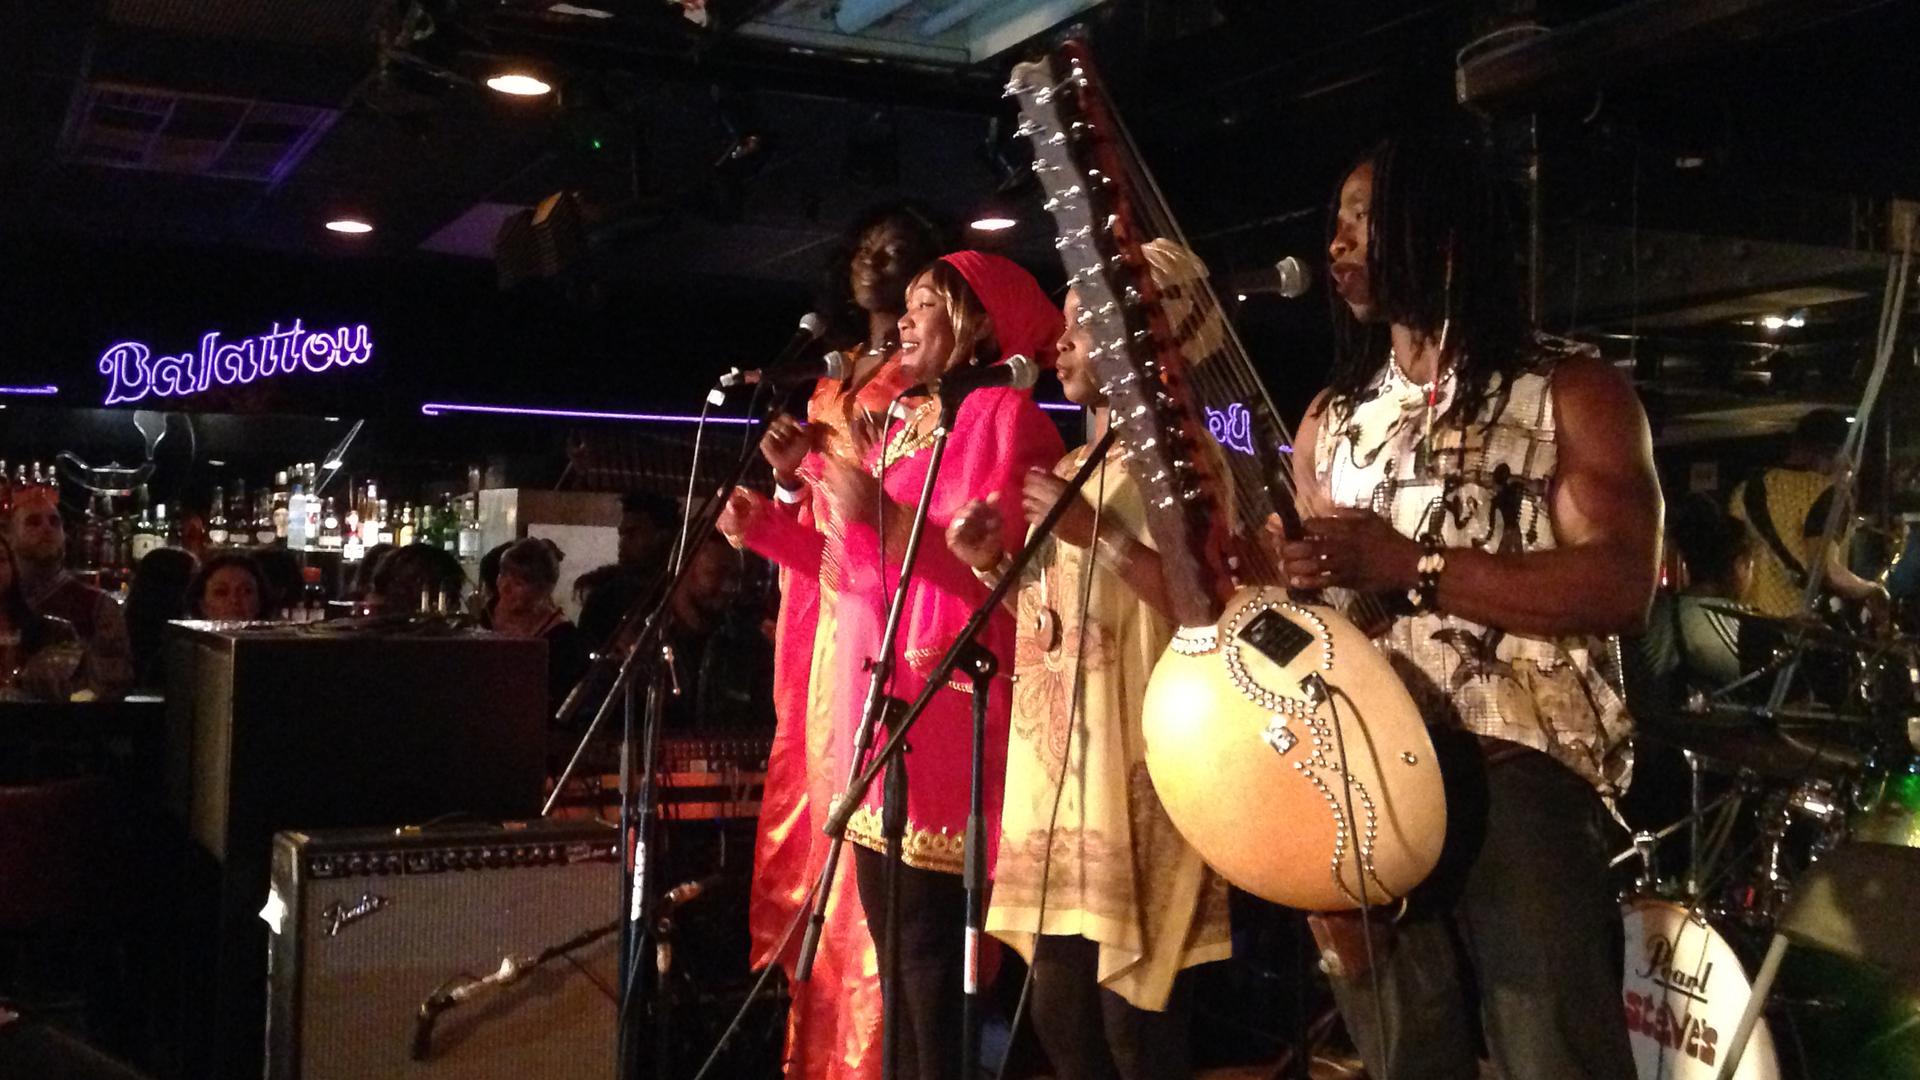 Yamoussa Kora & Thousand Colors onstage at Club Balattou during a preliminary round of the Syli D’Or competition in March.